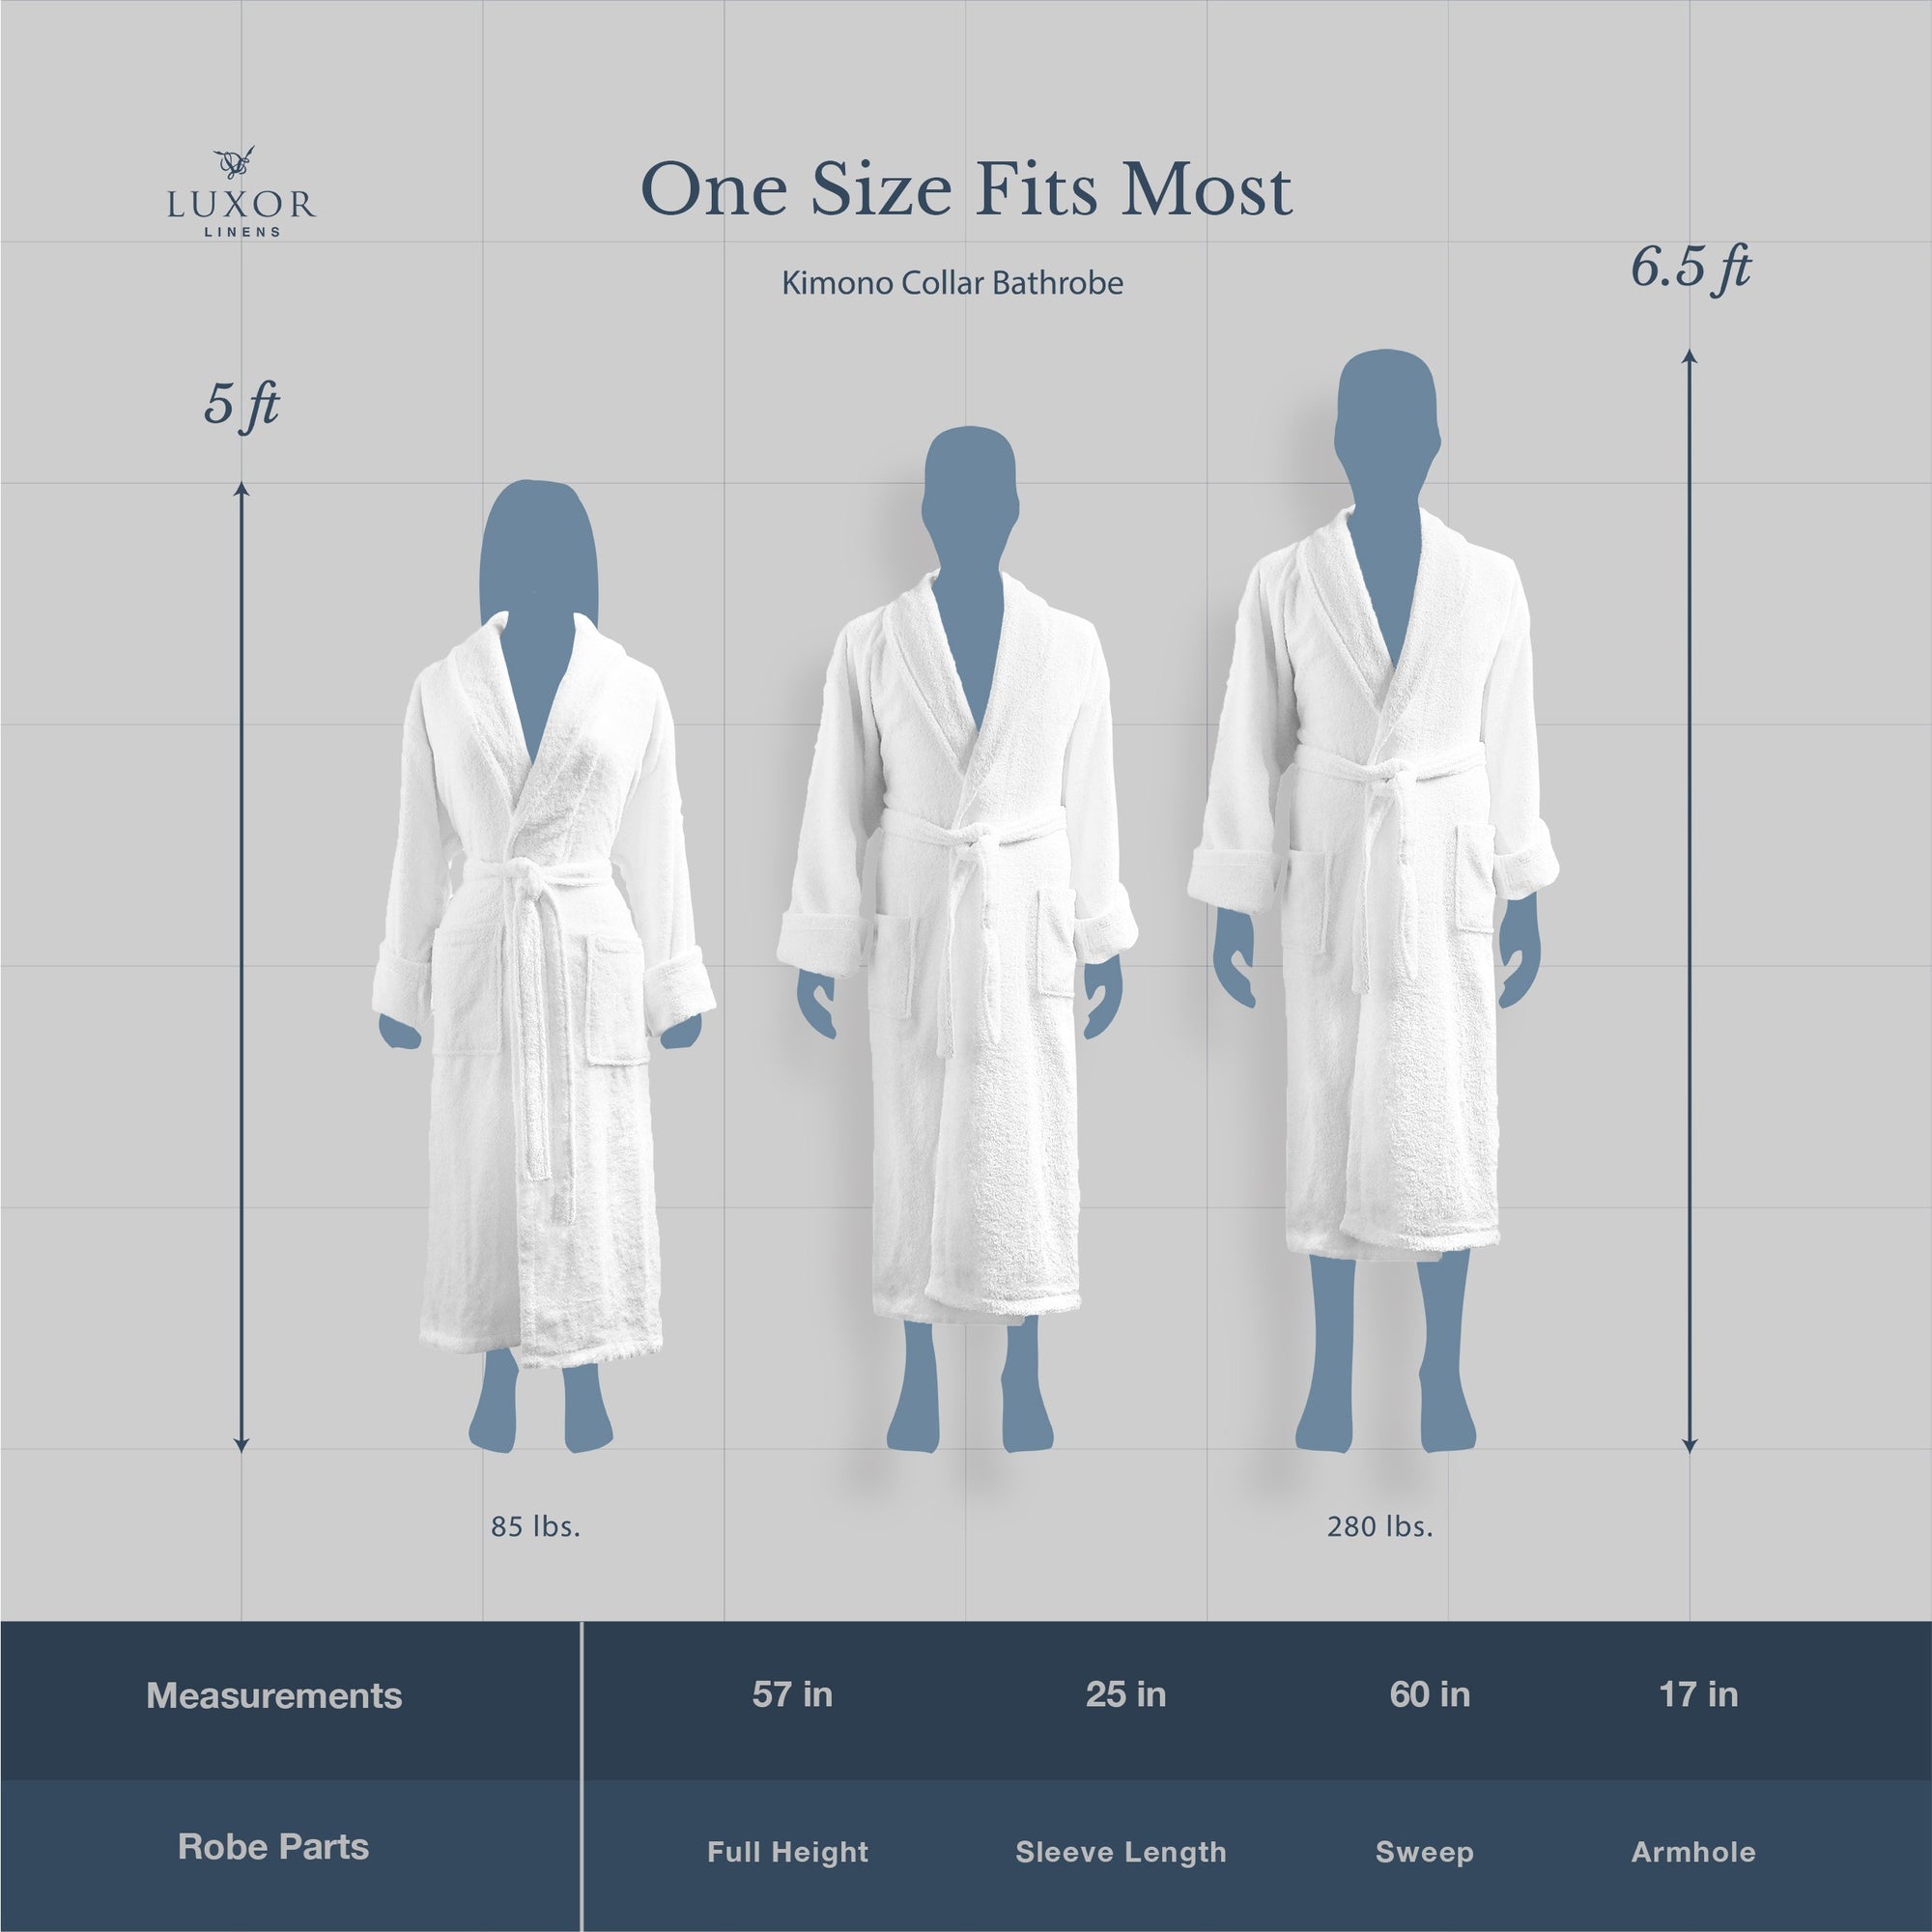 Shop by industry robes :: Spa Robes Wholesale :: 100% Turkish Cotton White  Terry Kimono Bathrobe - Wholesale bathrobes, Spa robes, Kids robes, Cotton  robes, Spa Slippers, Wholesale Towels